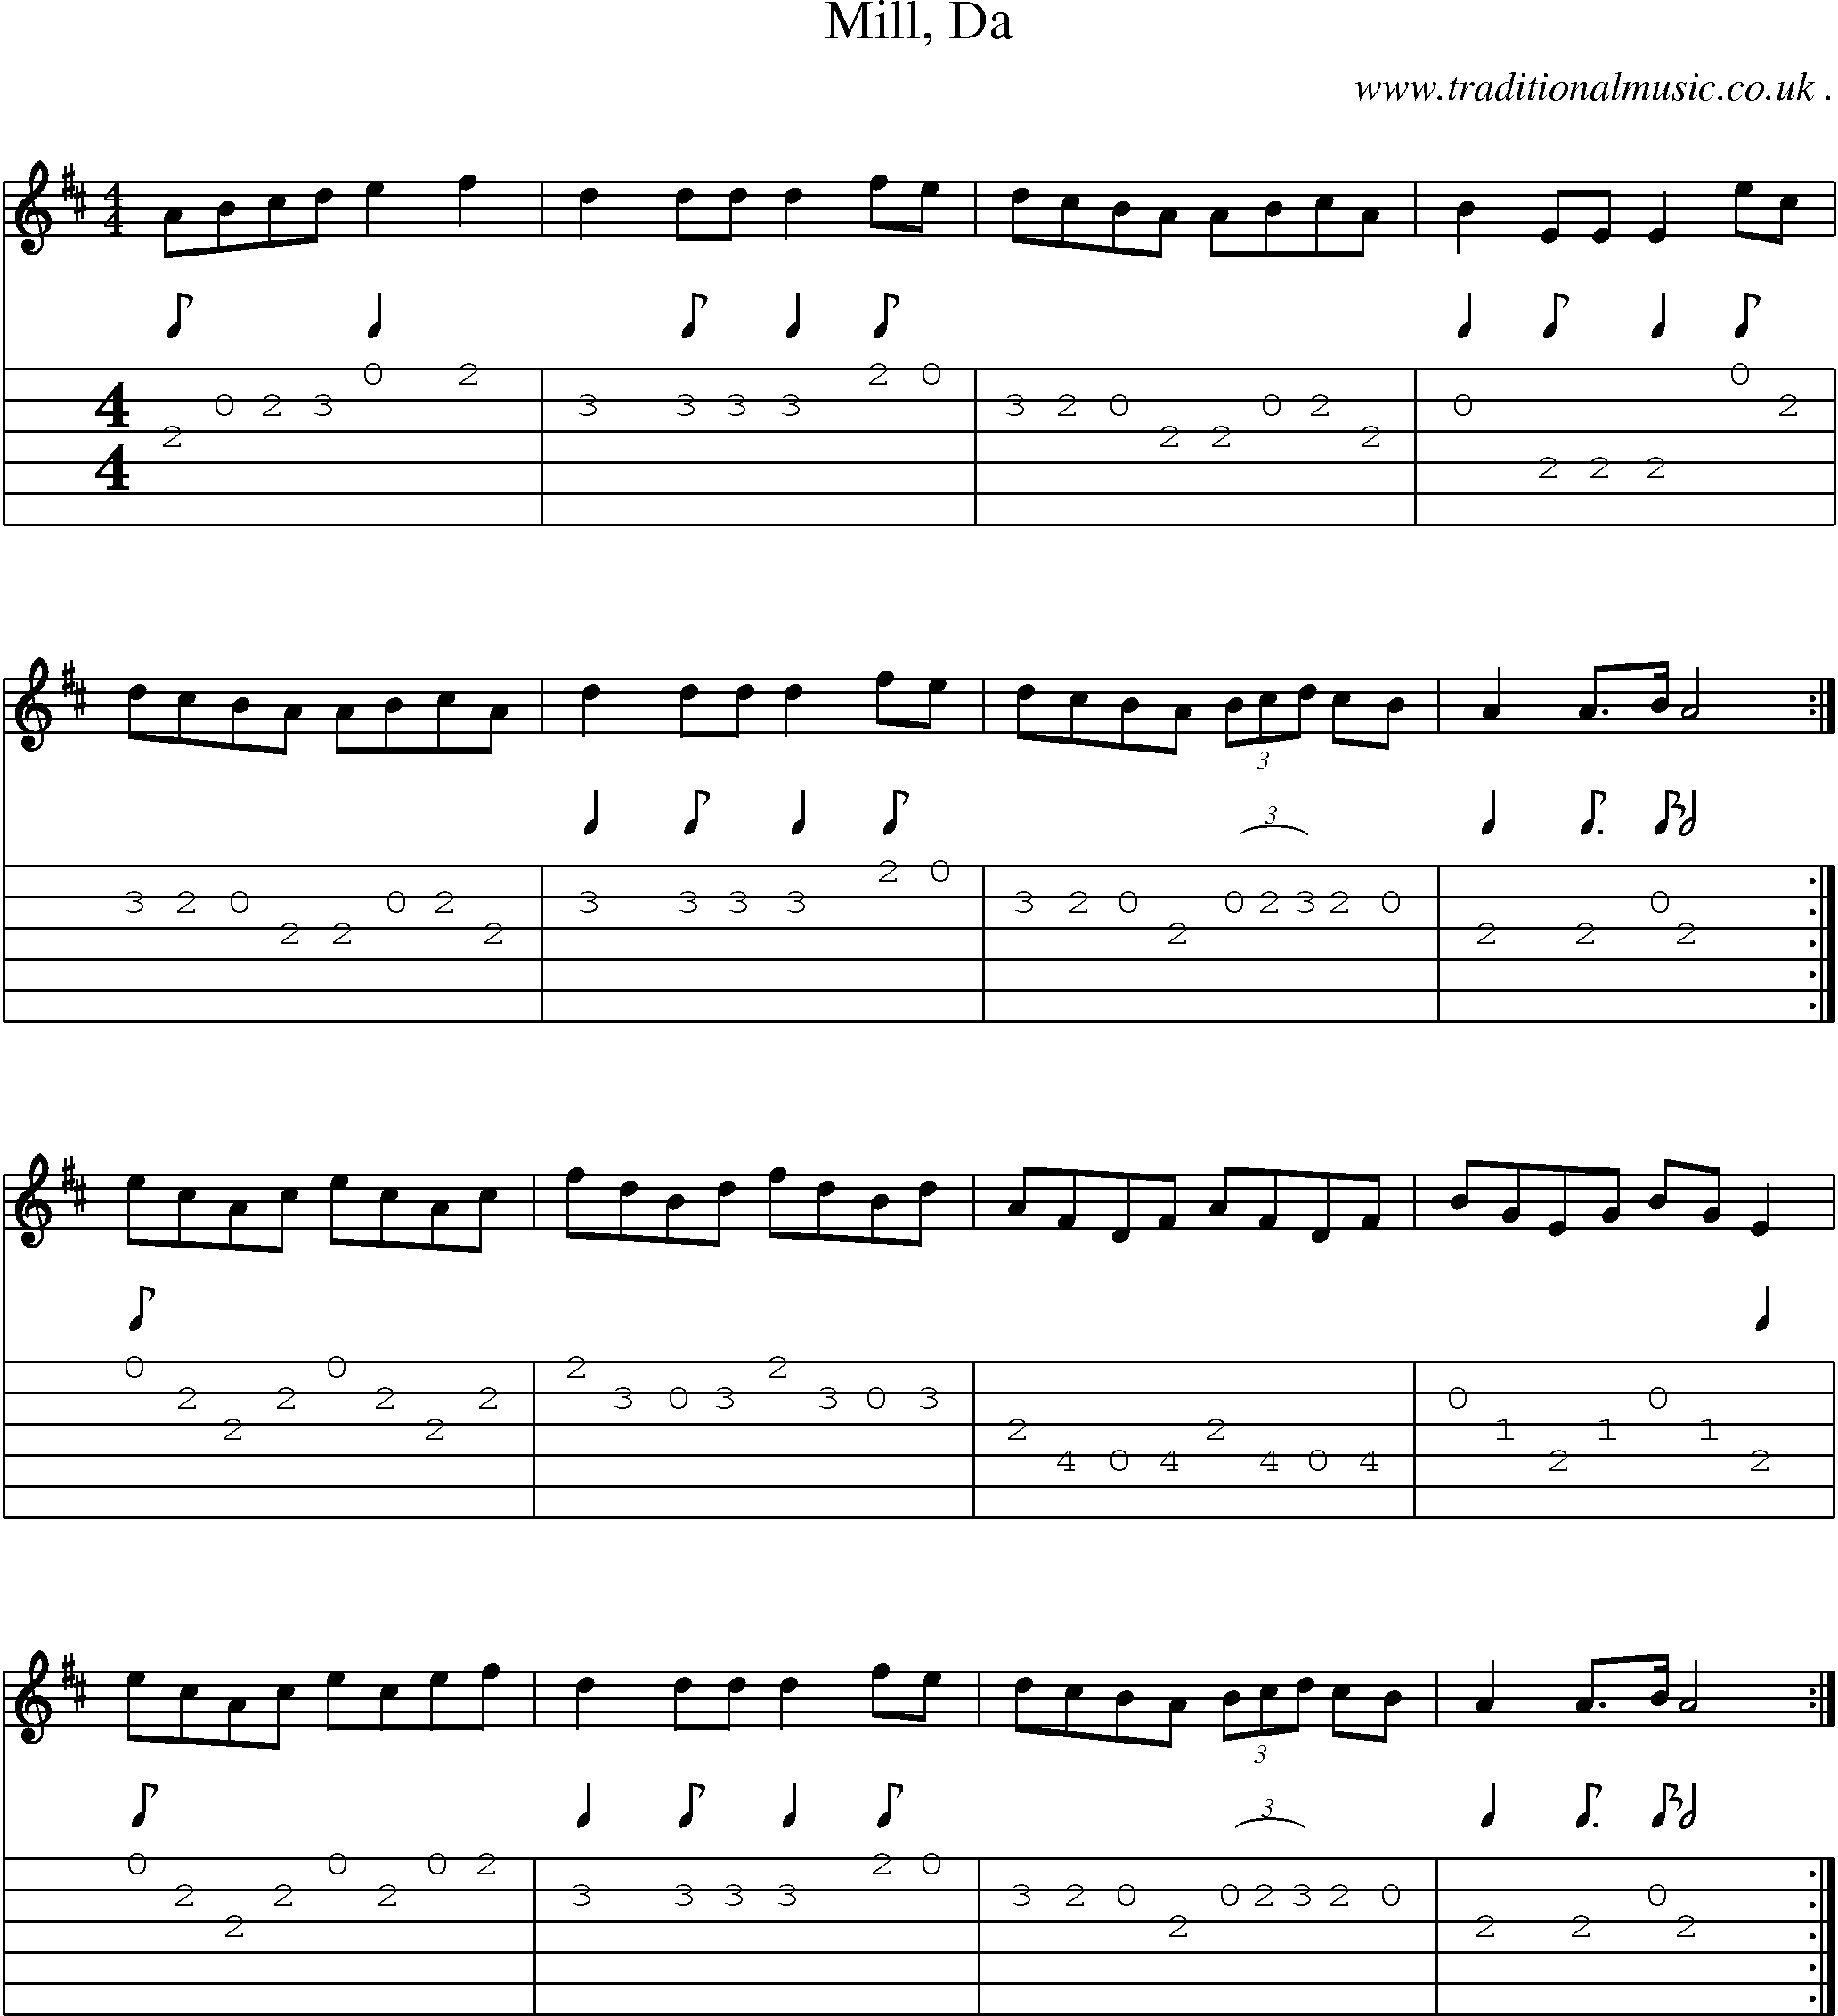 Sheet-music  score, Chords and Guitar Tabs for Mill Da